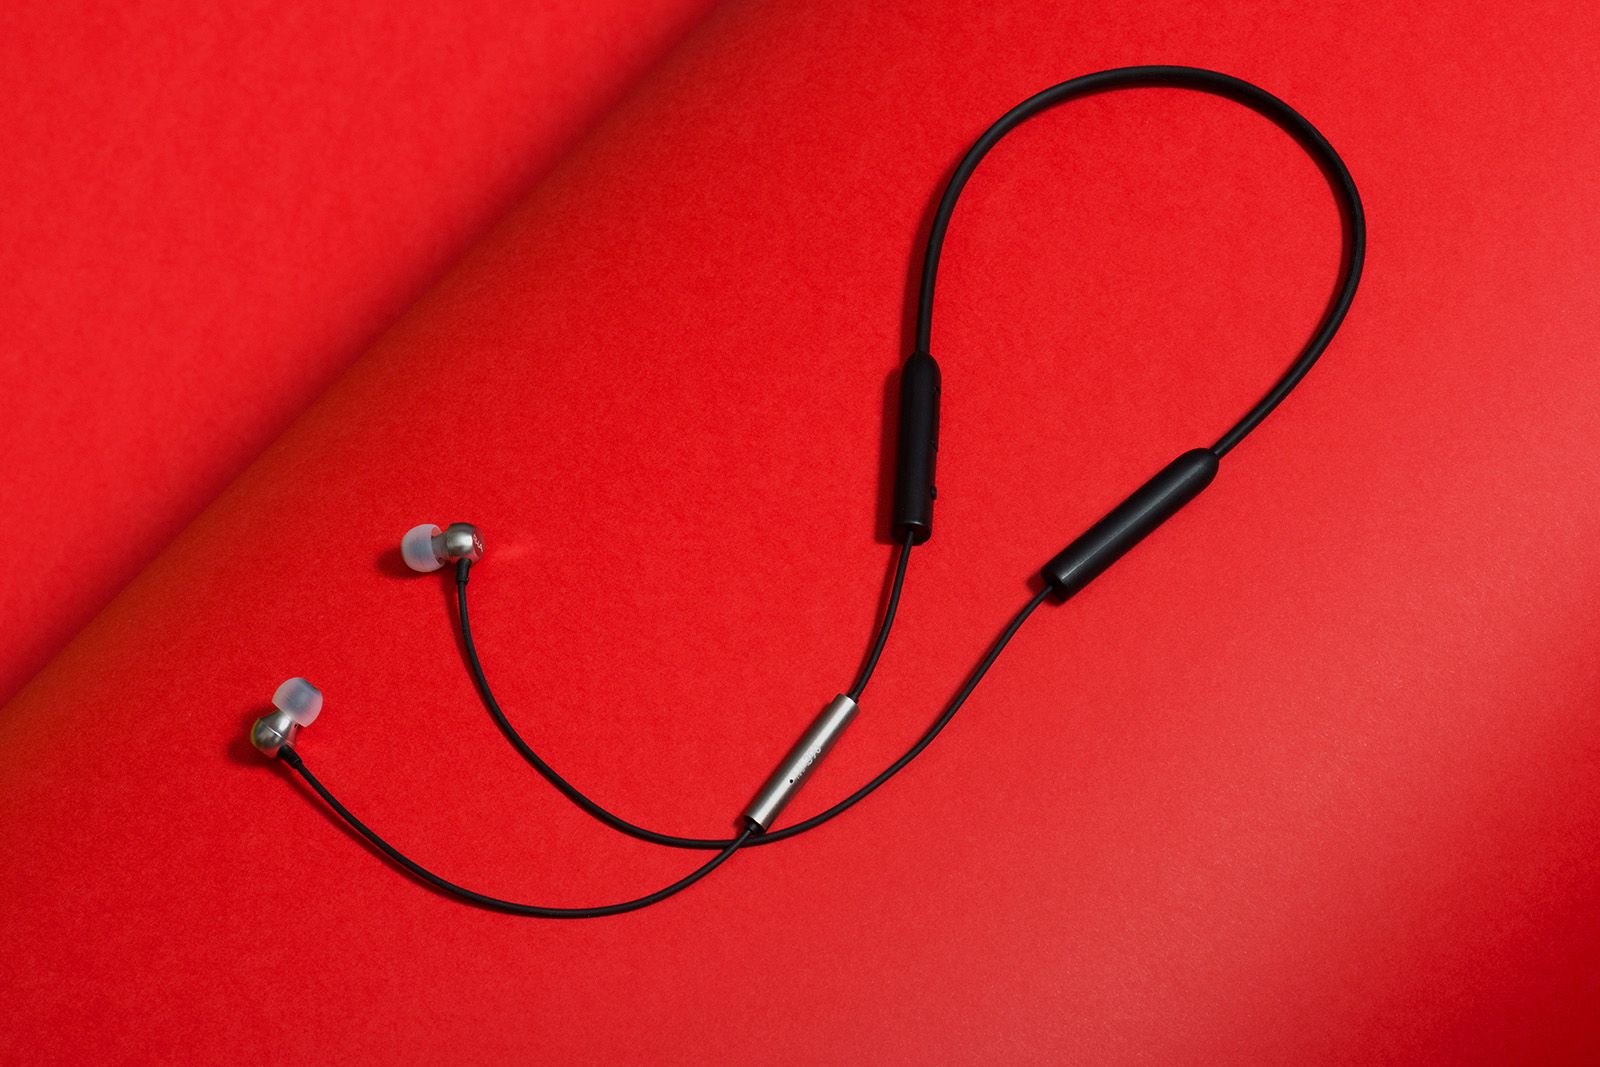 RHA MA390 Wireless in-ears take on Beats X but for just £60 image 1